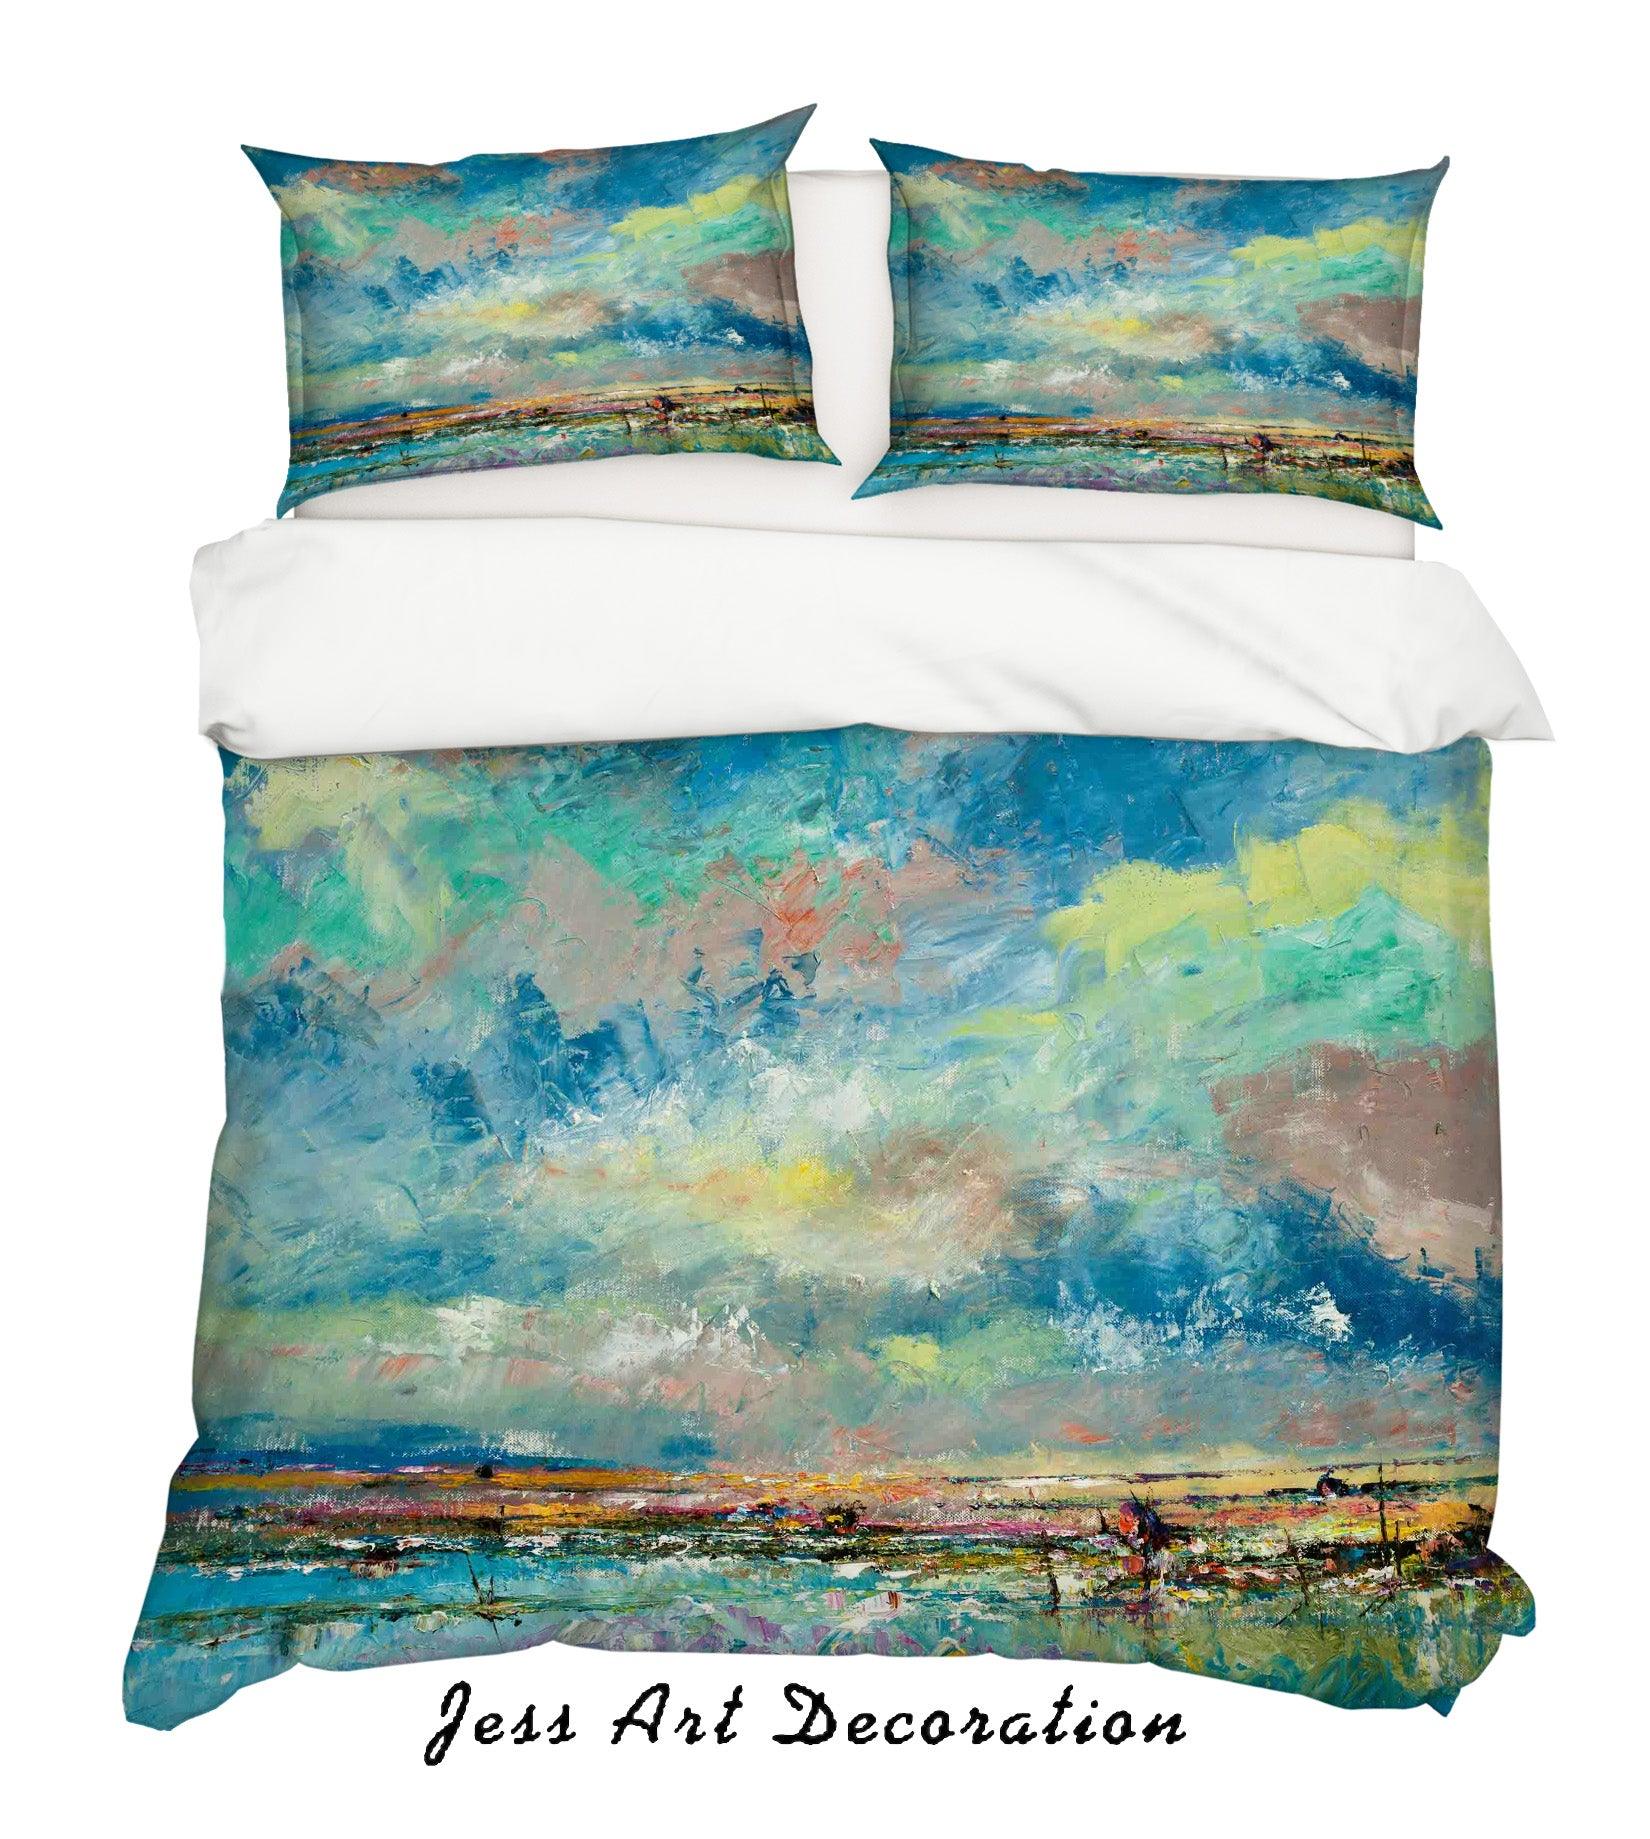 3D Abstract Blue Oil Painting Quilt Cover Set Bedding Set Pillowcasesn 73- Jess Art Decoration